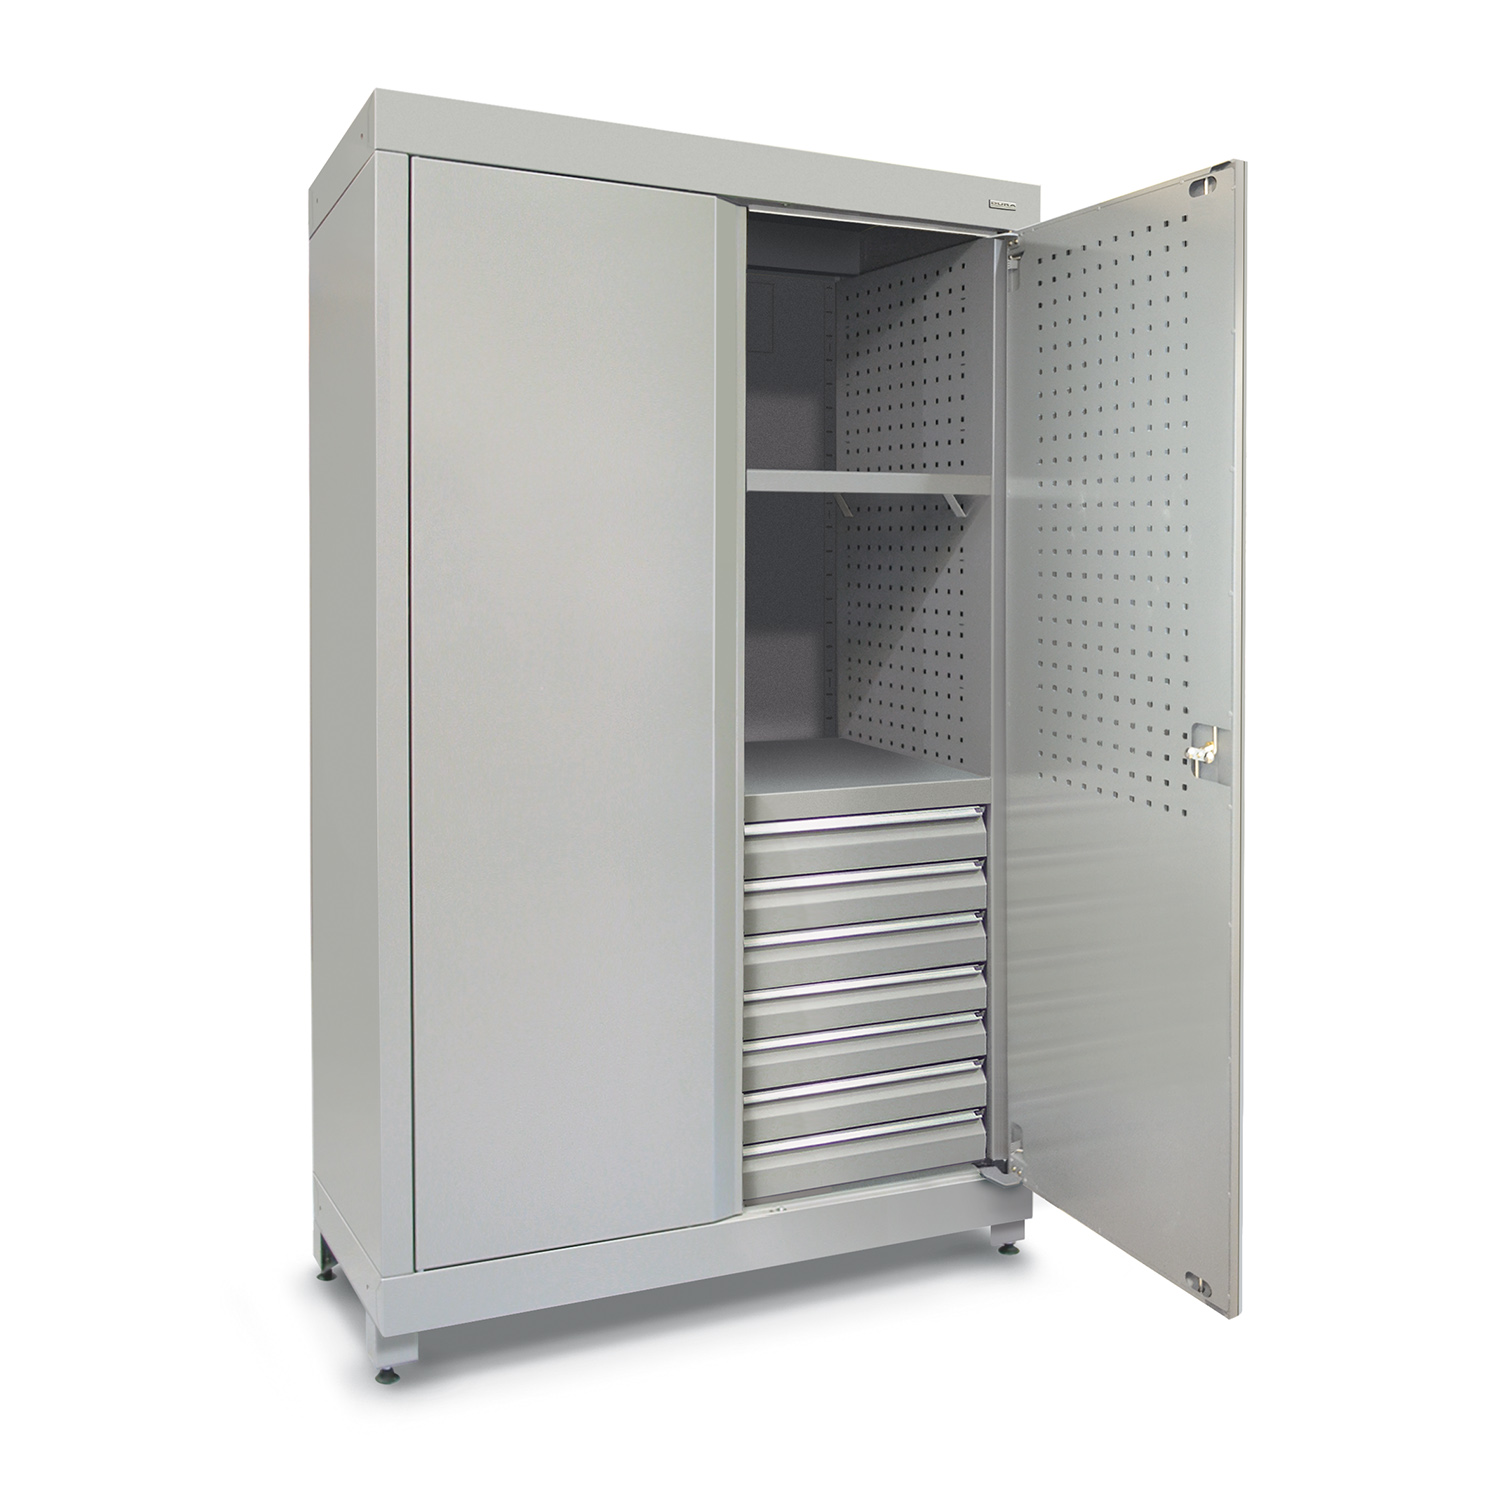 1200mm Heavy-duty shelving unit with 7 drawers